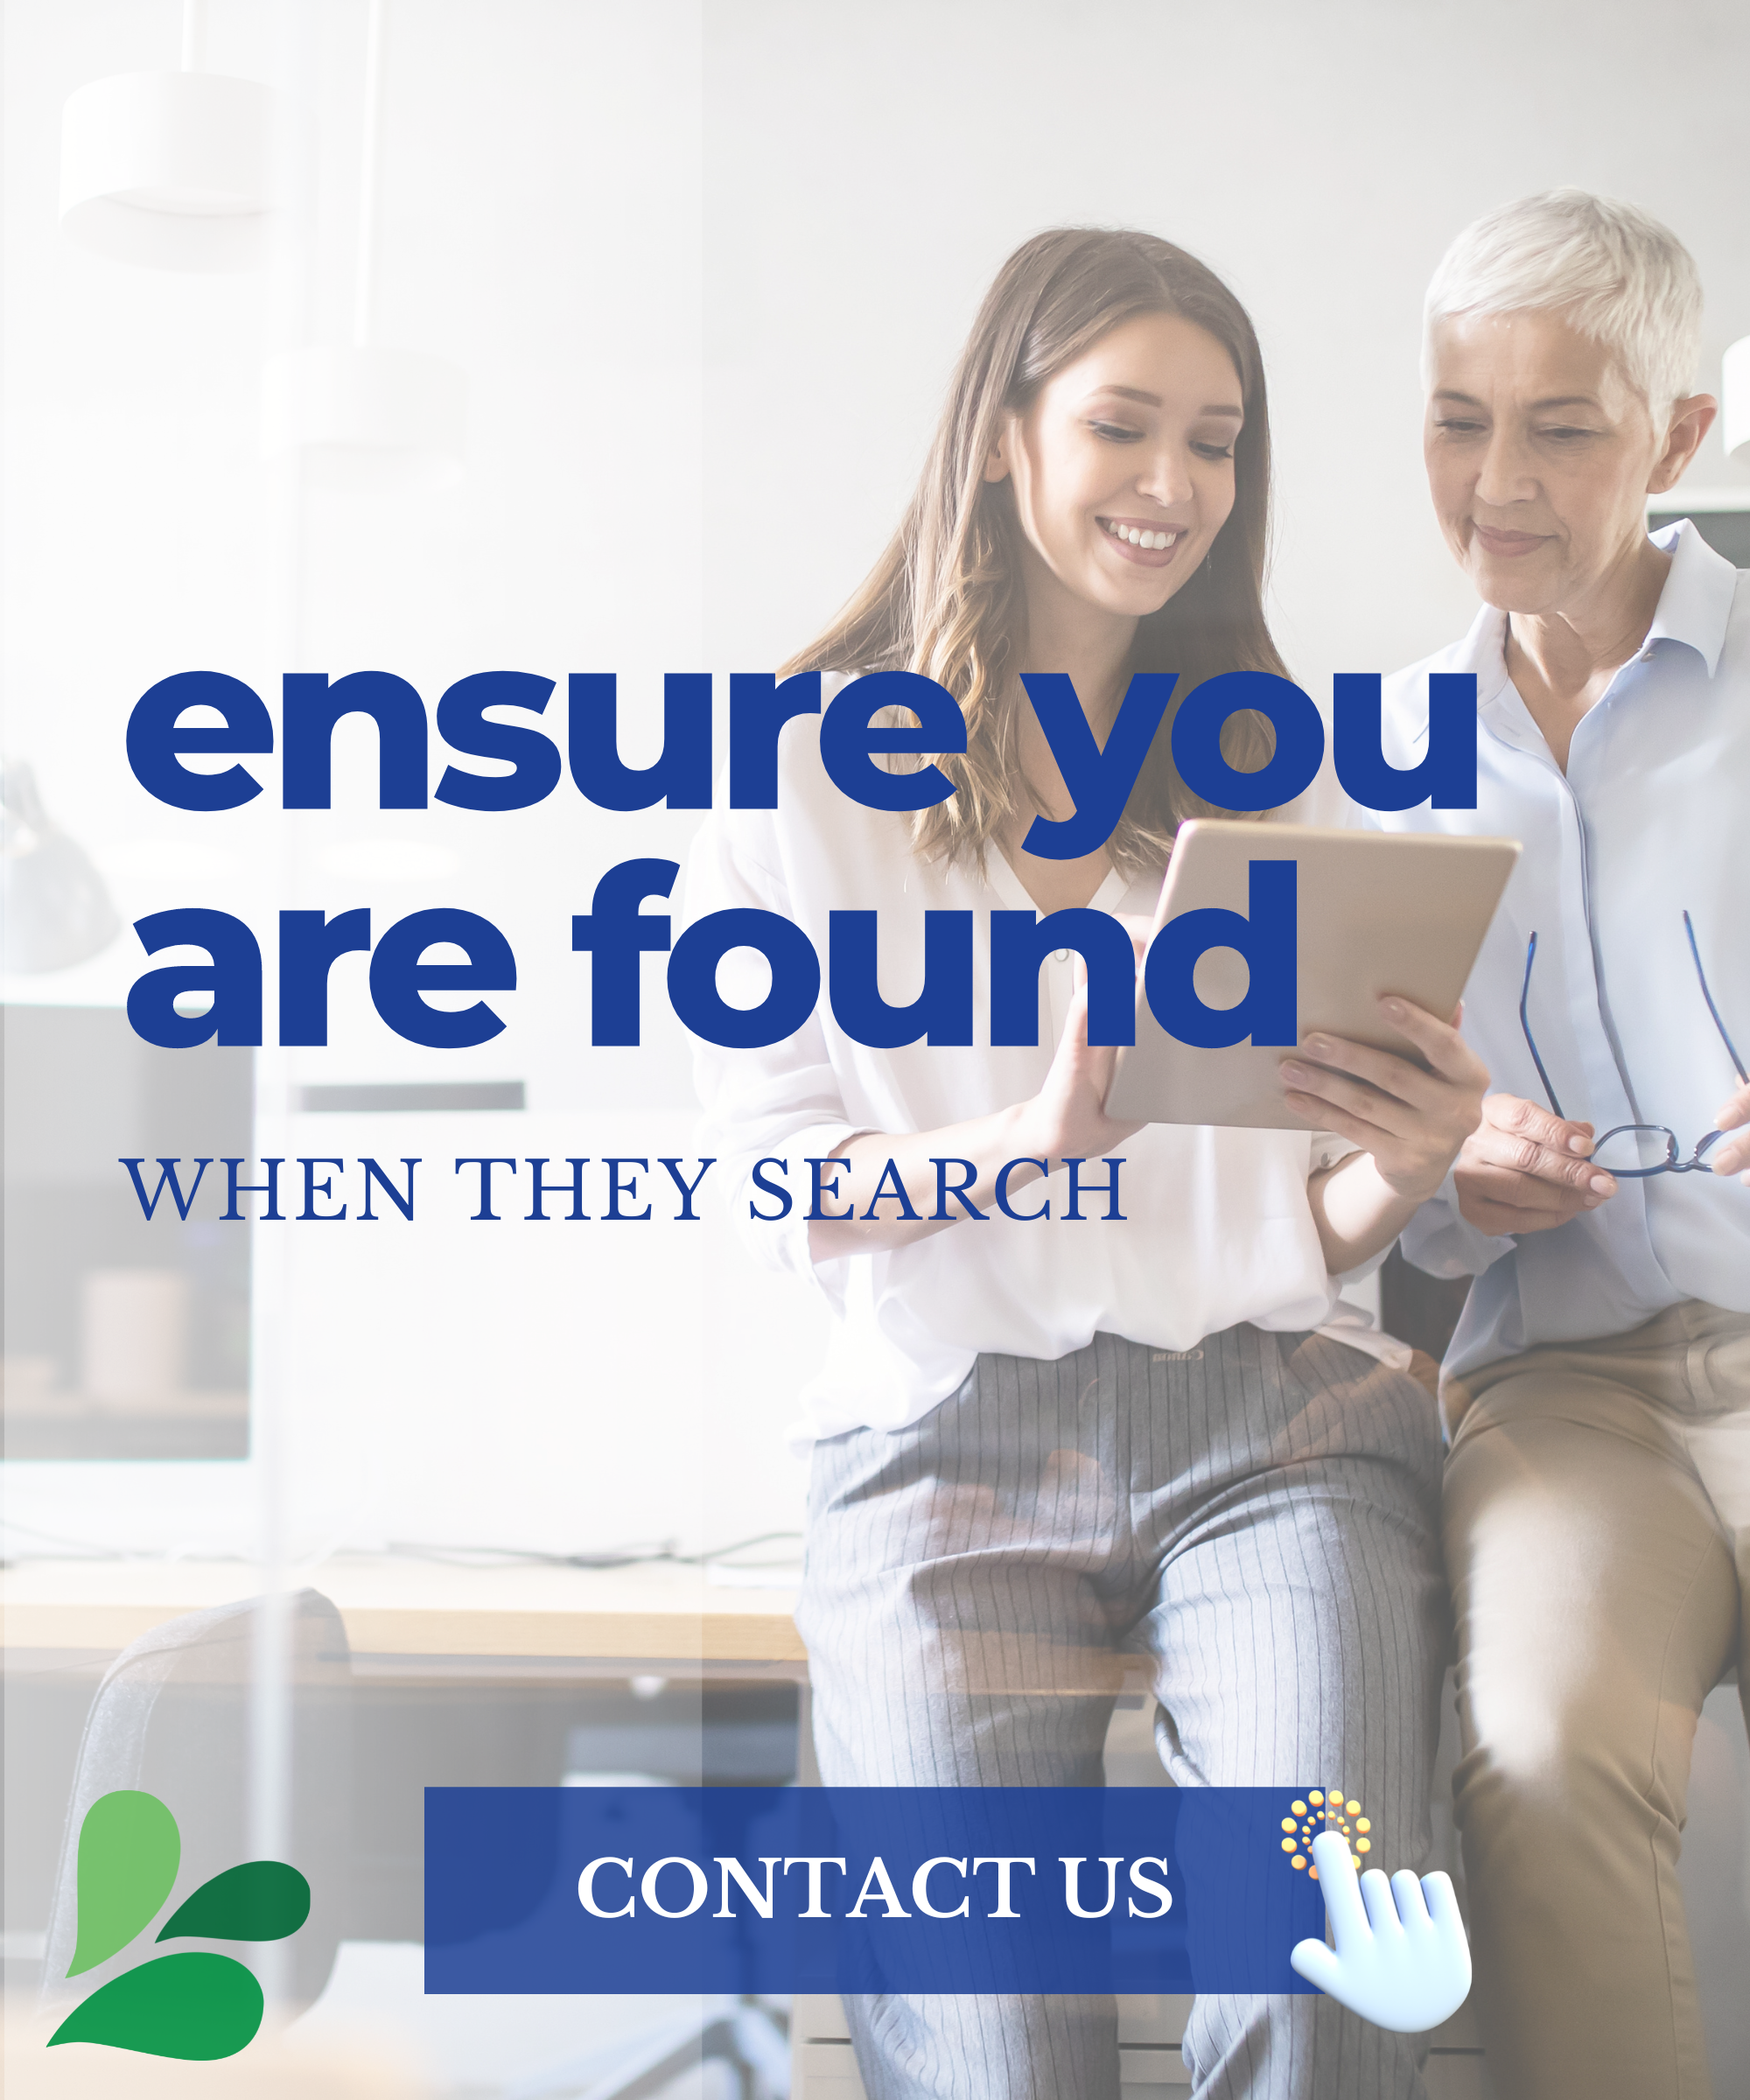 two women smiling and looking at a tablet with text overlay of ensure you are found when they search and contact us with Robb Digital logo